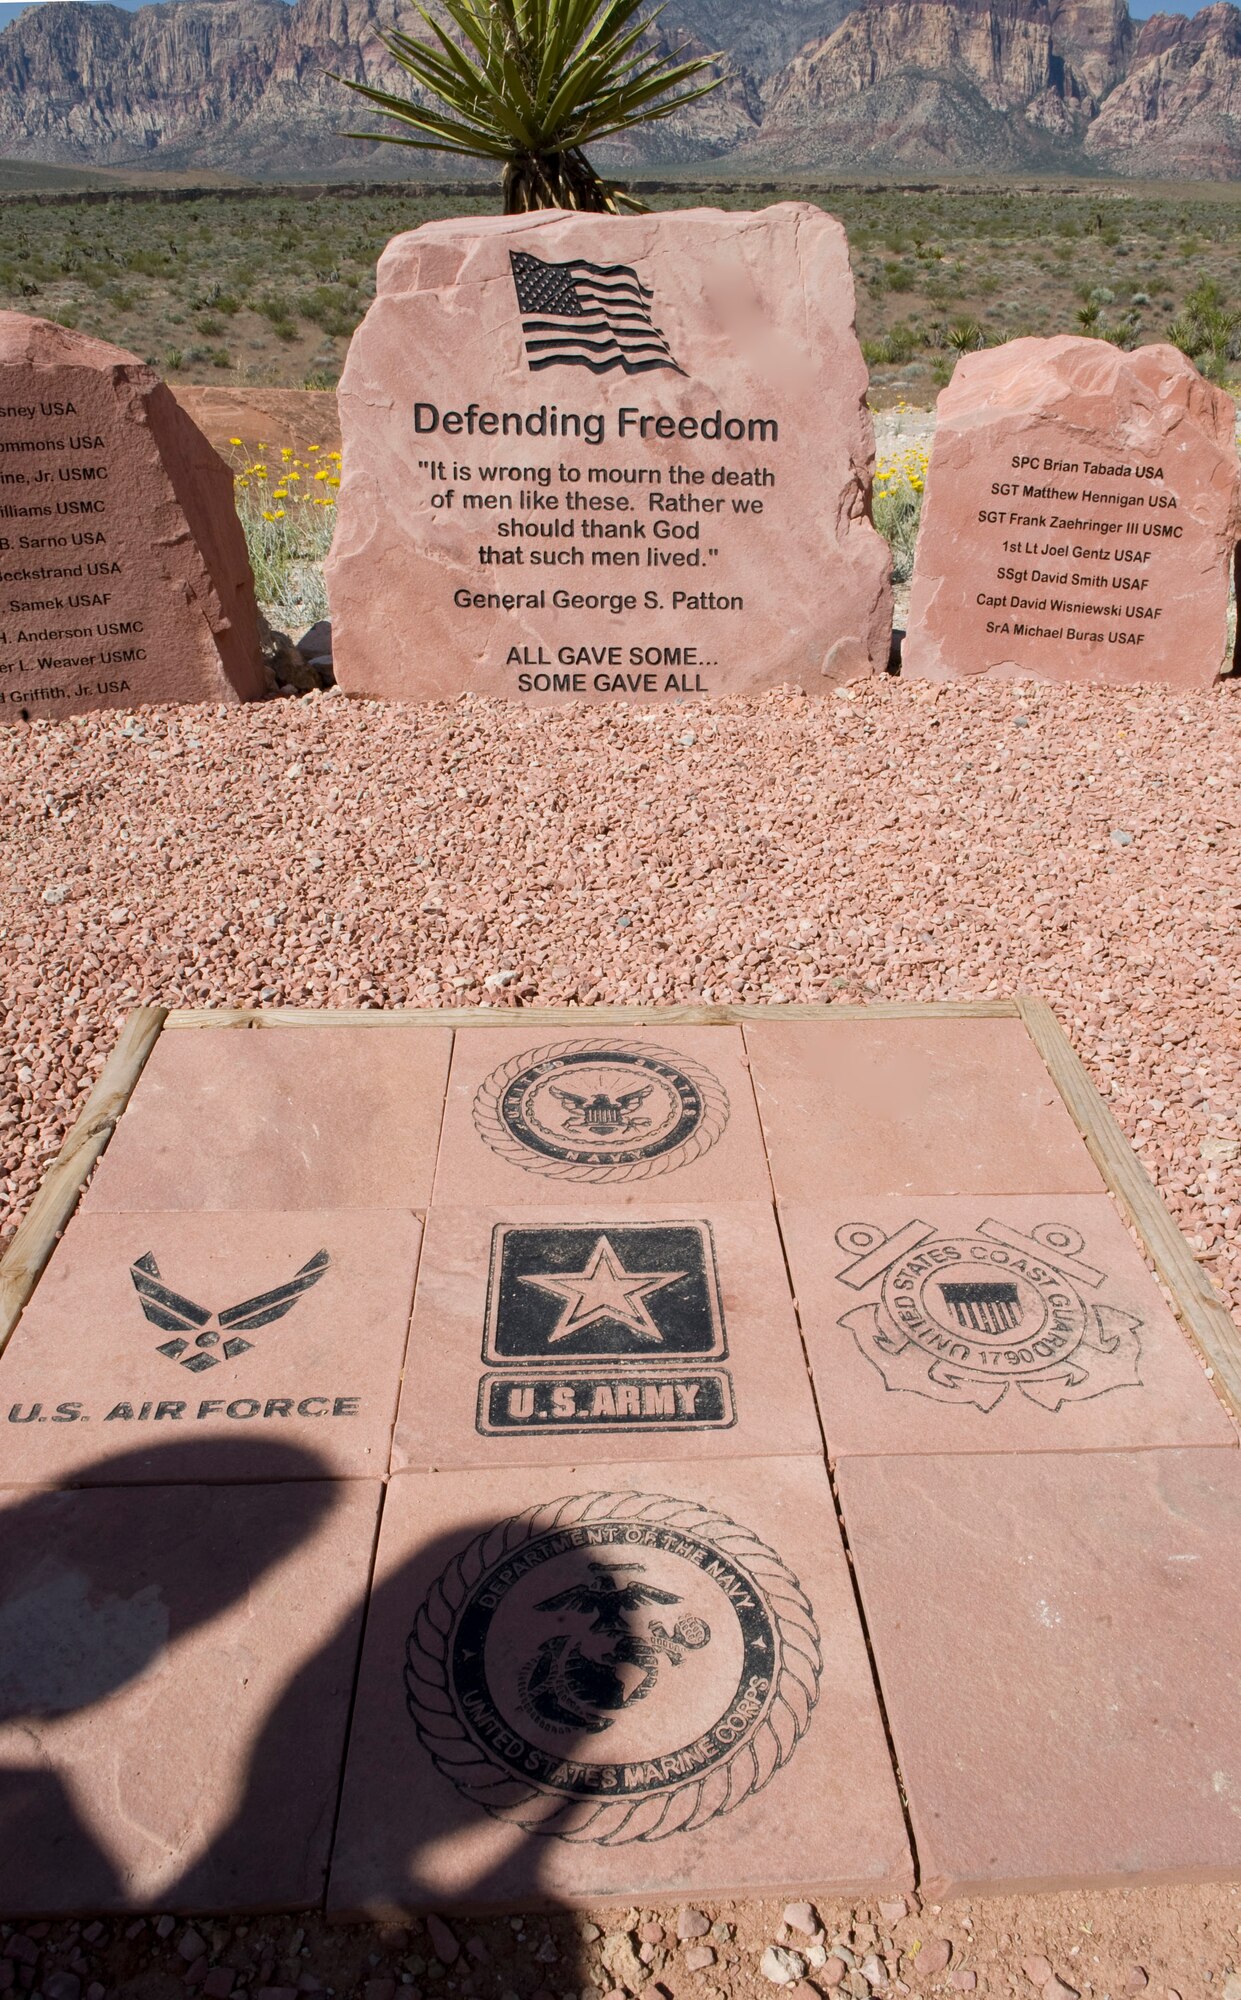 LAS VEGAS --The shadows of Nevada Congressman Joe Heck and his son, Joseph, are visible as they pay their respects at the Defending Freedom Memorial at Red Rock National Conservation Area May 14, 2011. Congressman Heck was a guest speaker at  the 6th annual Defending Freedom Memorial dedication ceremony. Hosted annually, the event honors fallen servicemembers with ties to Nevada and provides a forum for the community to express its appreciation for this sacrifice. The Defending Freedom Memorial was initially dedicated in 2005 and is comprised of seven sandstones with the engraved names of Nevada's fallen servicemen and women. This year, the names Nellis Airmen Senior Airman Michael Buras, Staff Sgt. David Smith, 1st Lt. Joel Gentz and Capt. David Wisniewski were added to the memorial. All four Airmen were lost in 2010 while supporting operations in Afghanistan.  (U.S. Air Force photo by Airman 1st Class Jamie L. Nicley)